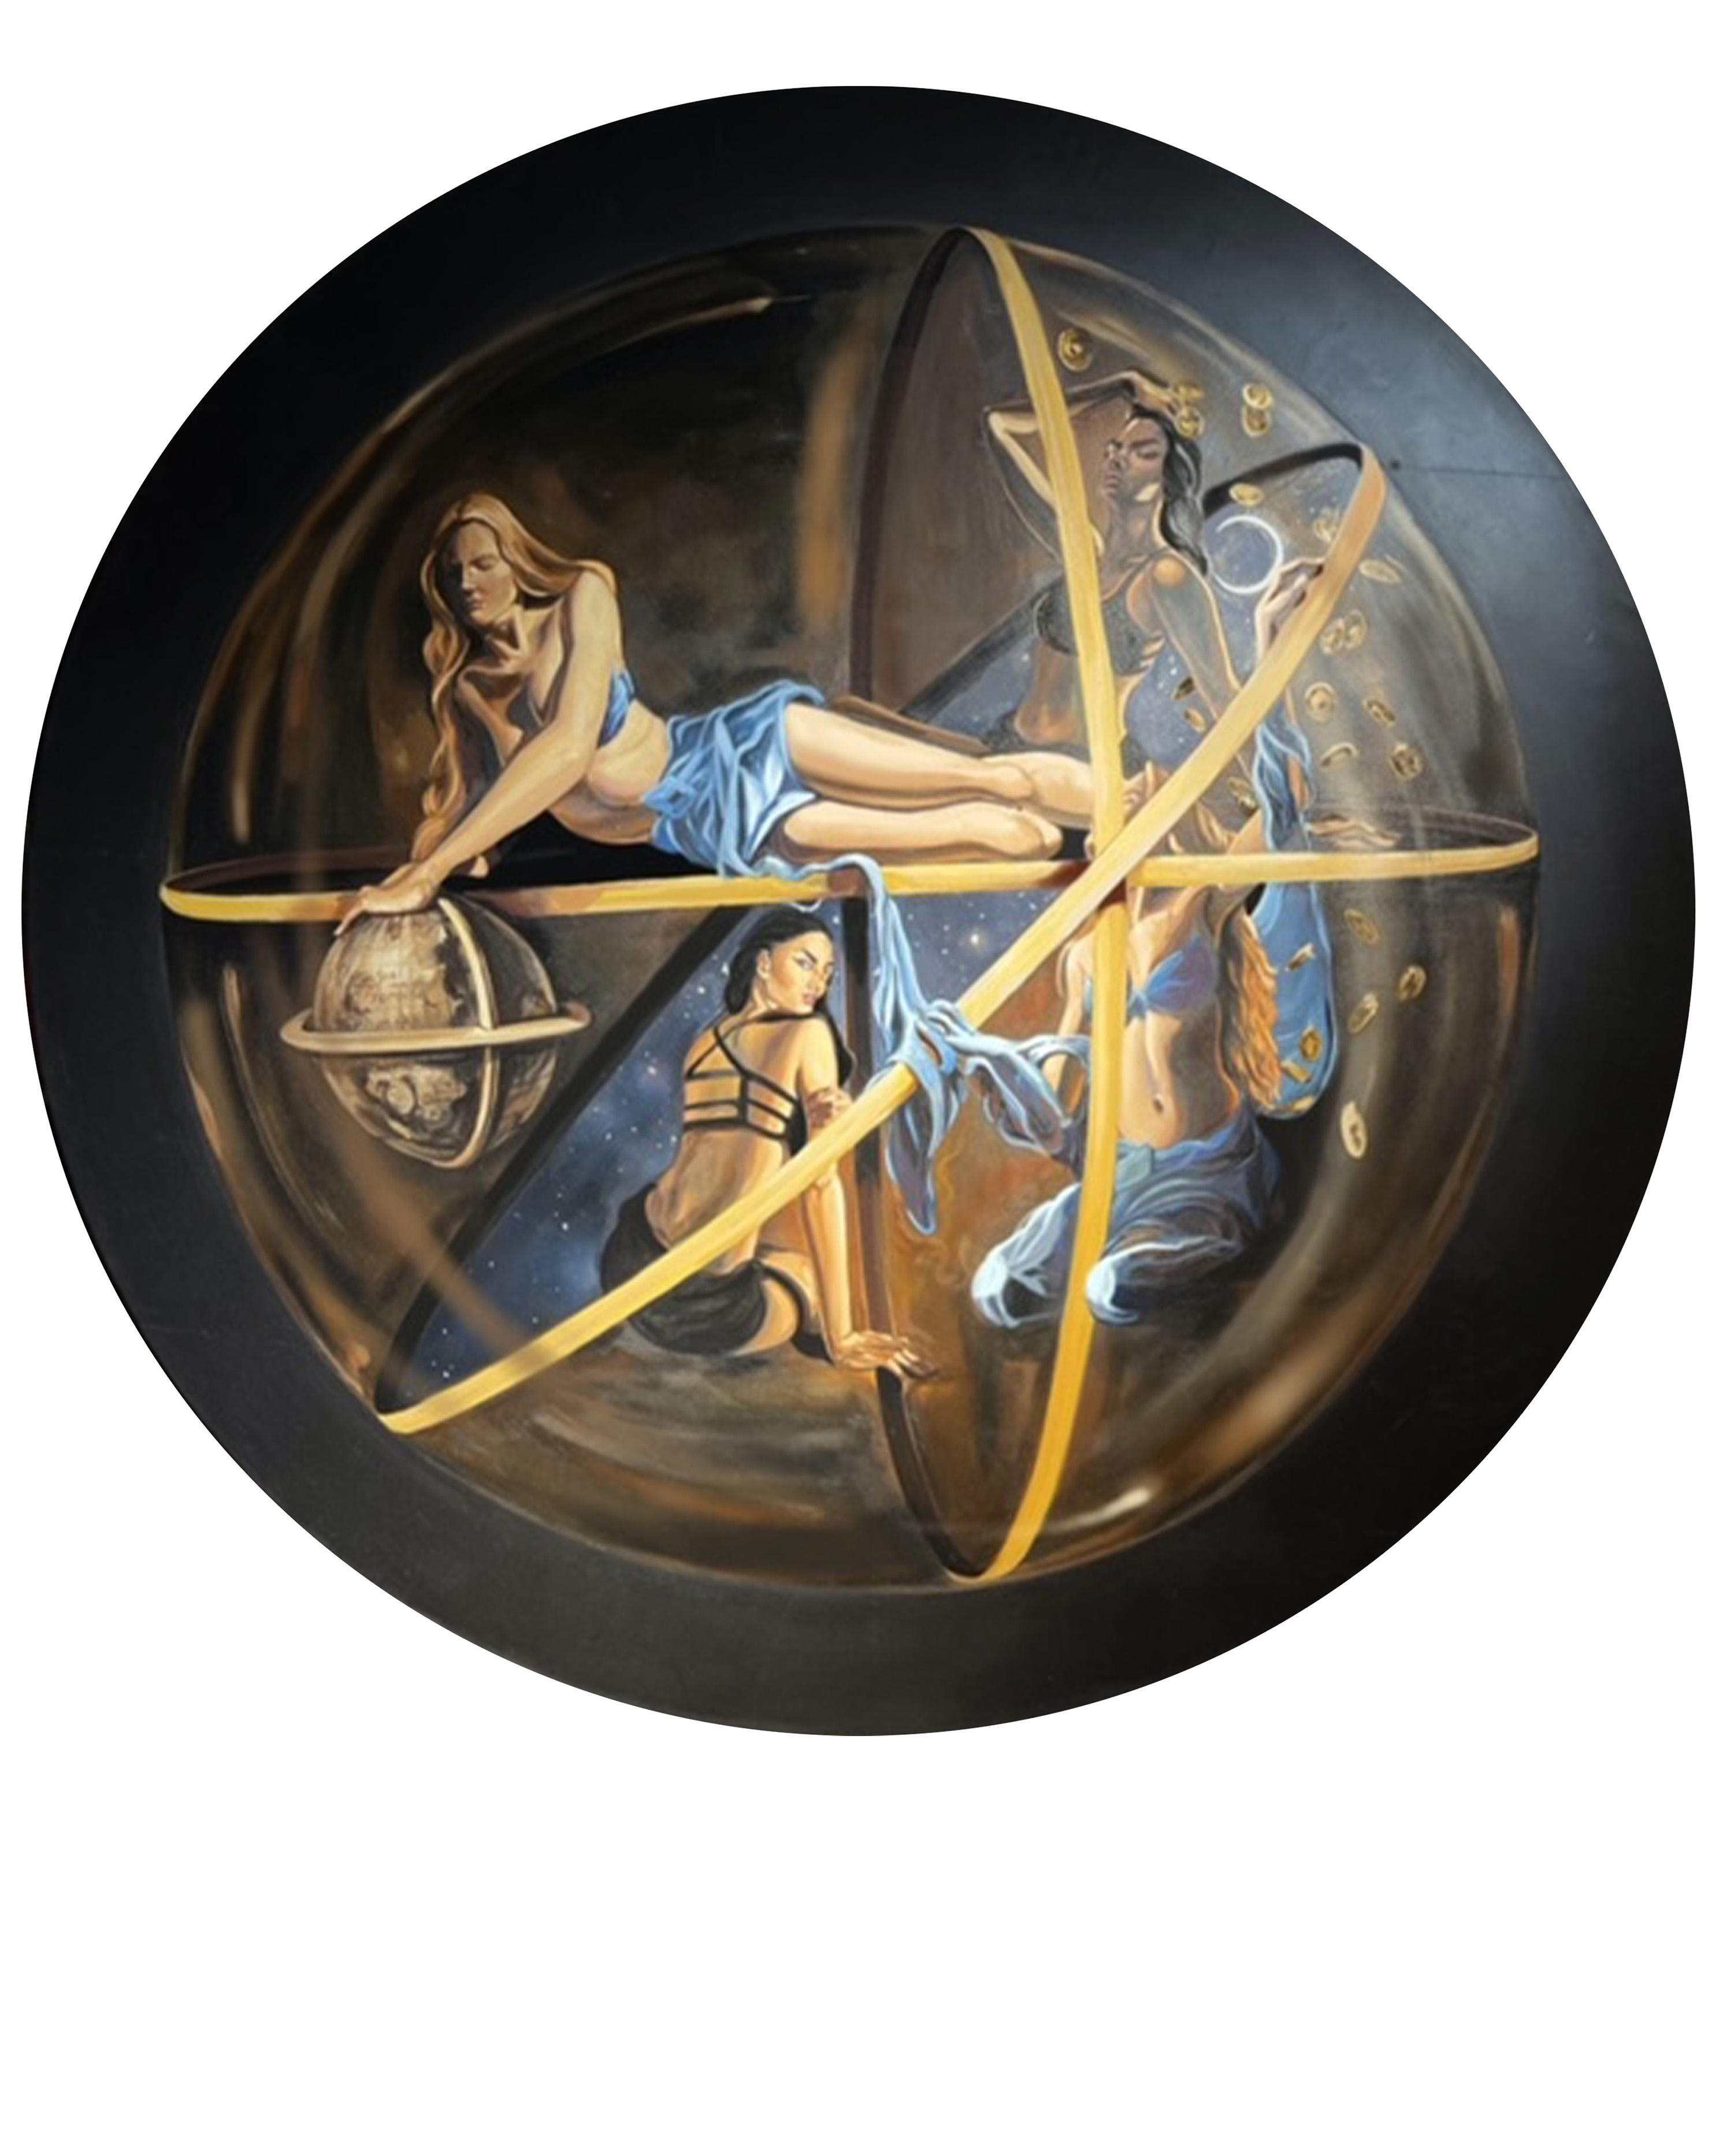 Title: AS THE UNIVERSE, SO THE SOUL<br> Medium: Oil on canvas<br> Size: 3 feet diameter CO